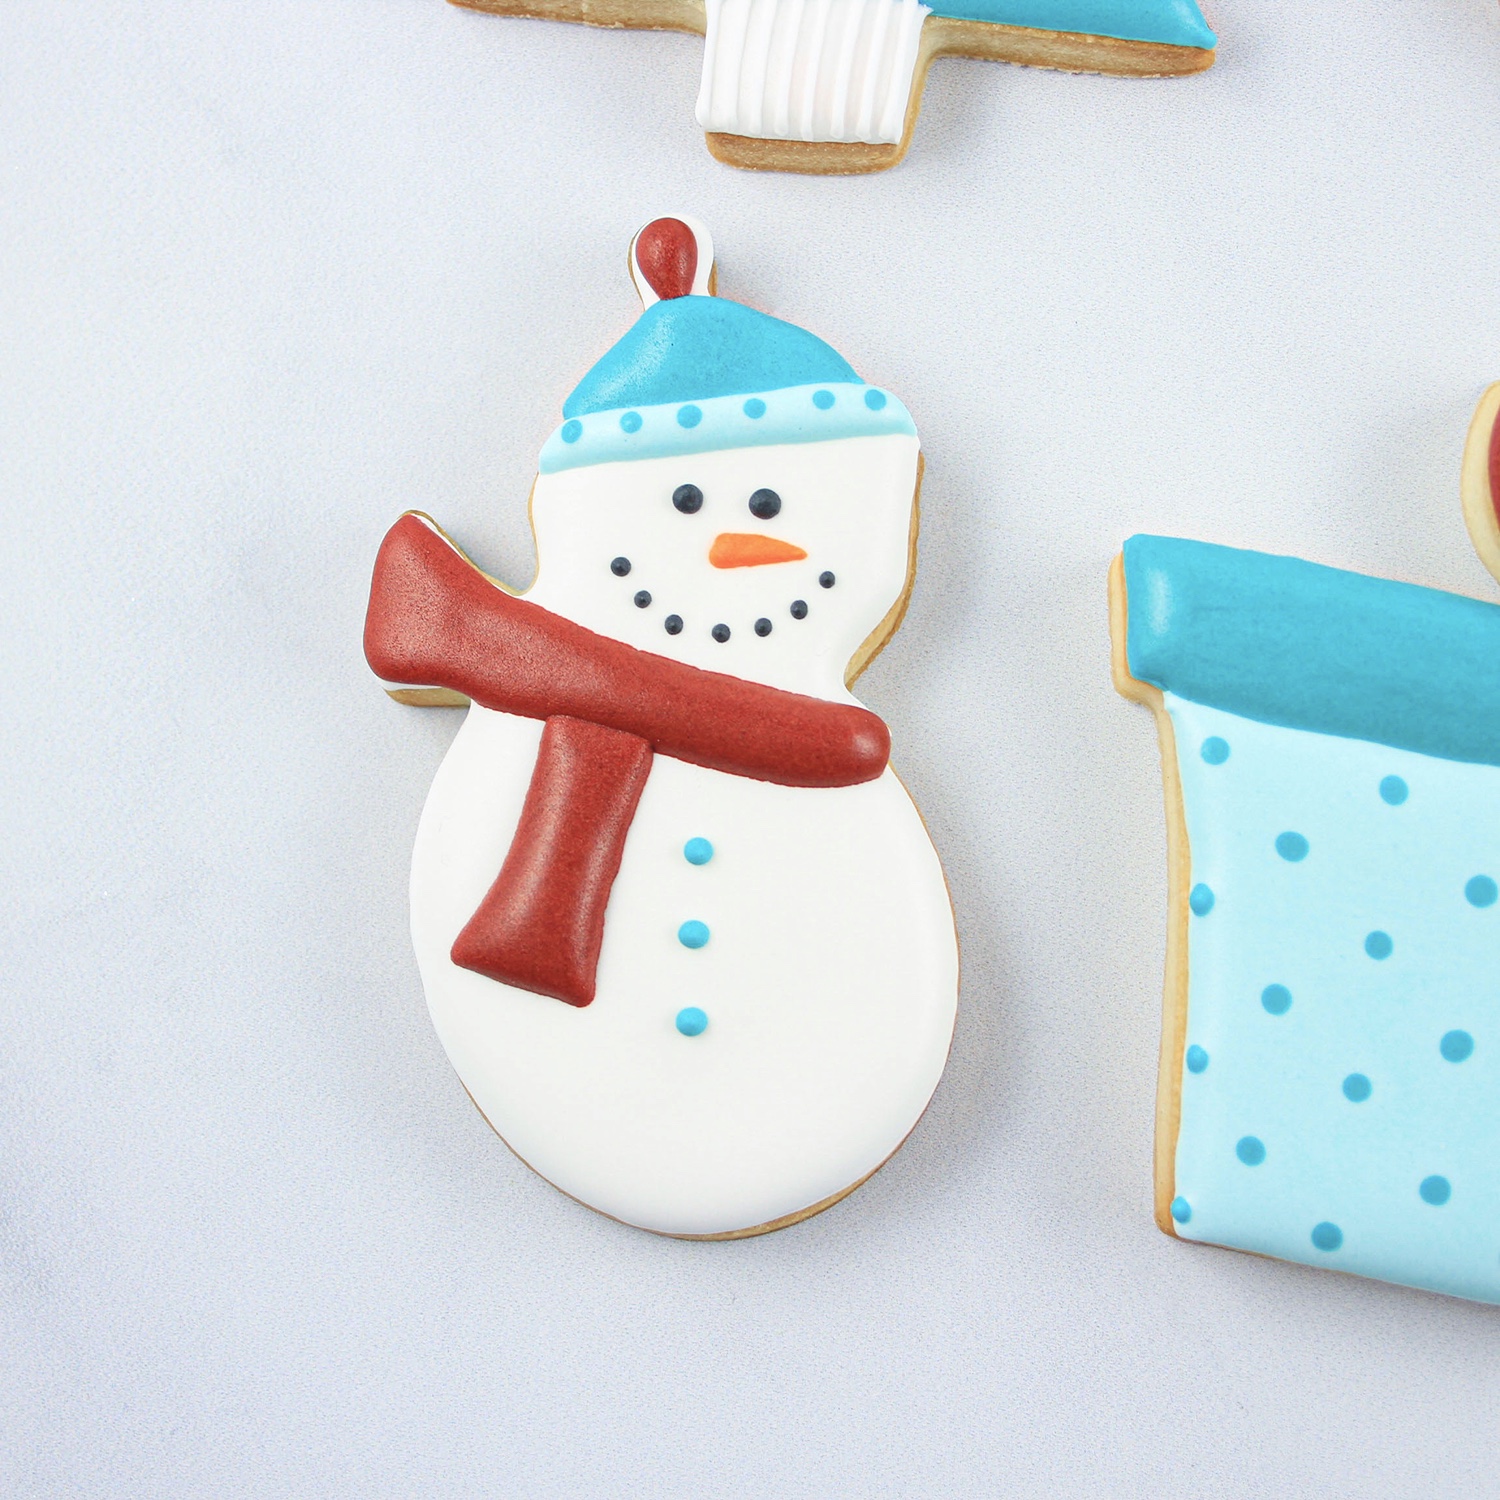 Snowman cookie decorated in royal icing with a red scarf and blue stocking cap